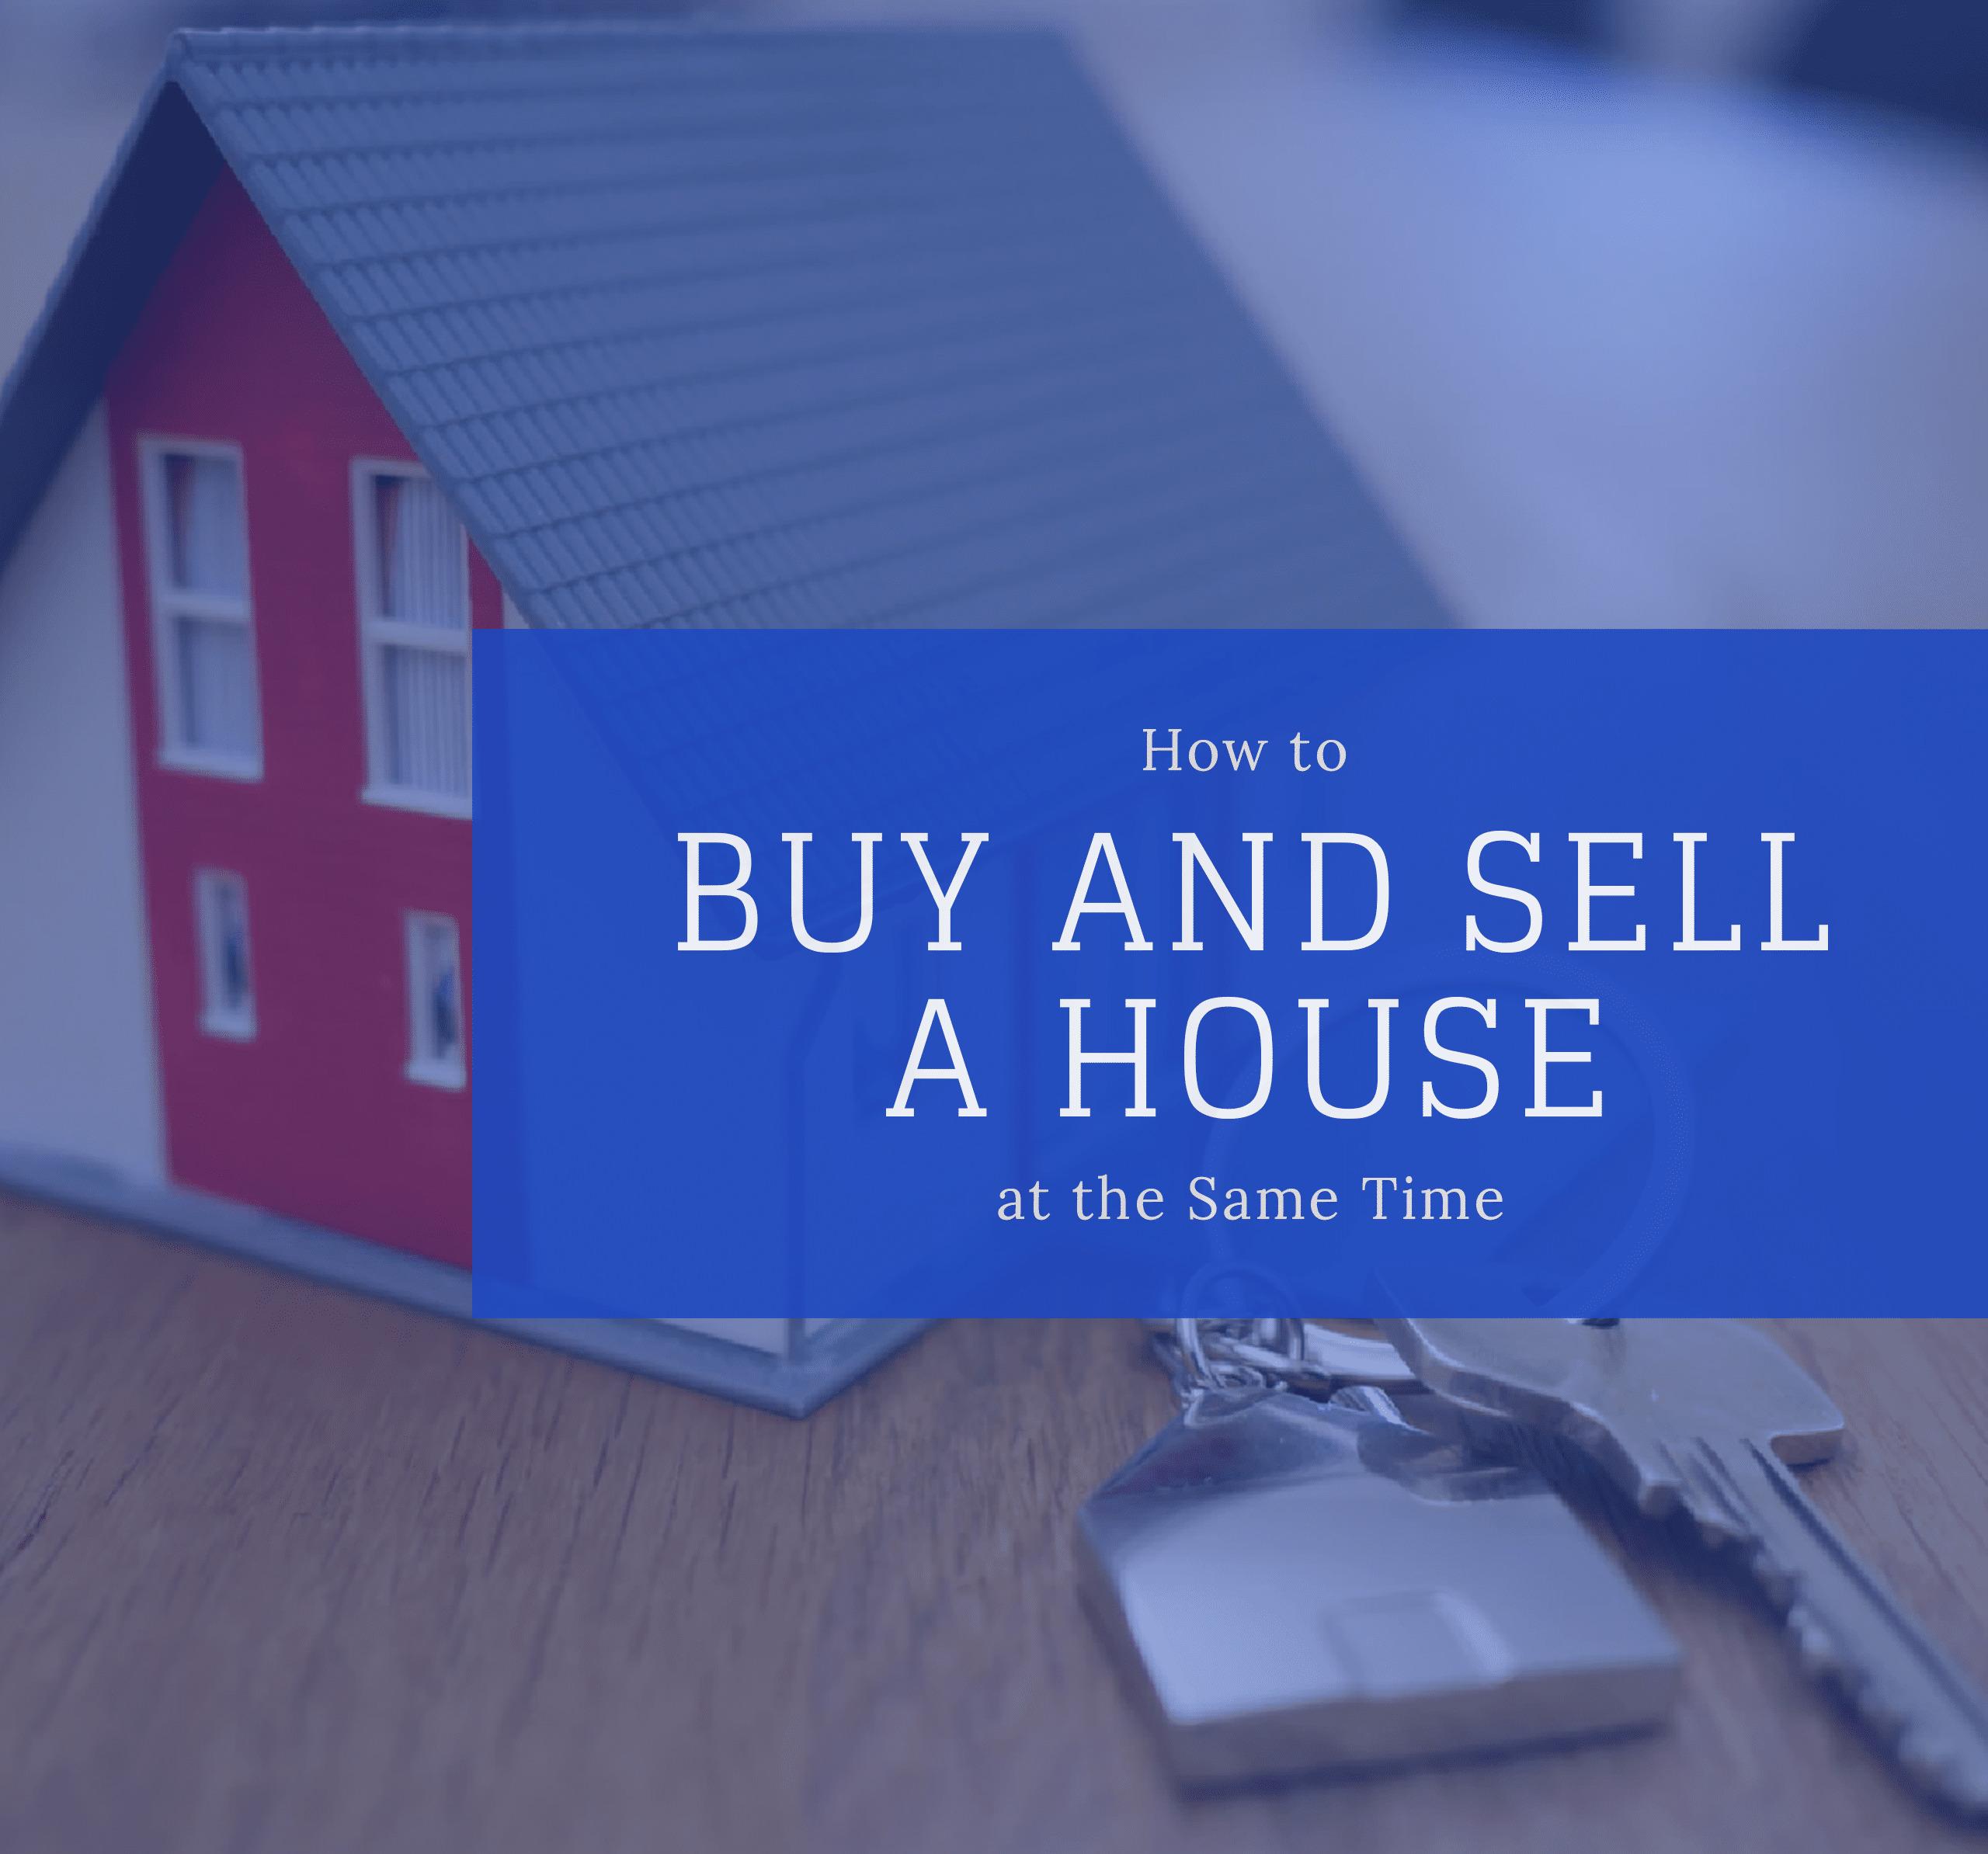 How to Buy and Sell A House At The Same Time